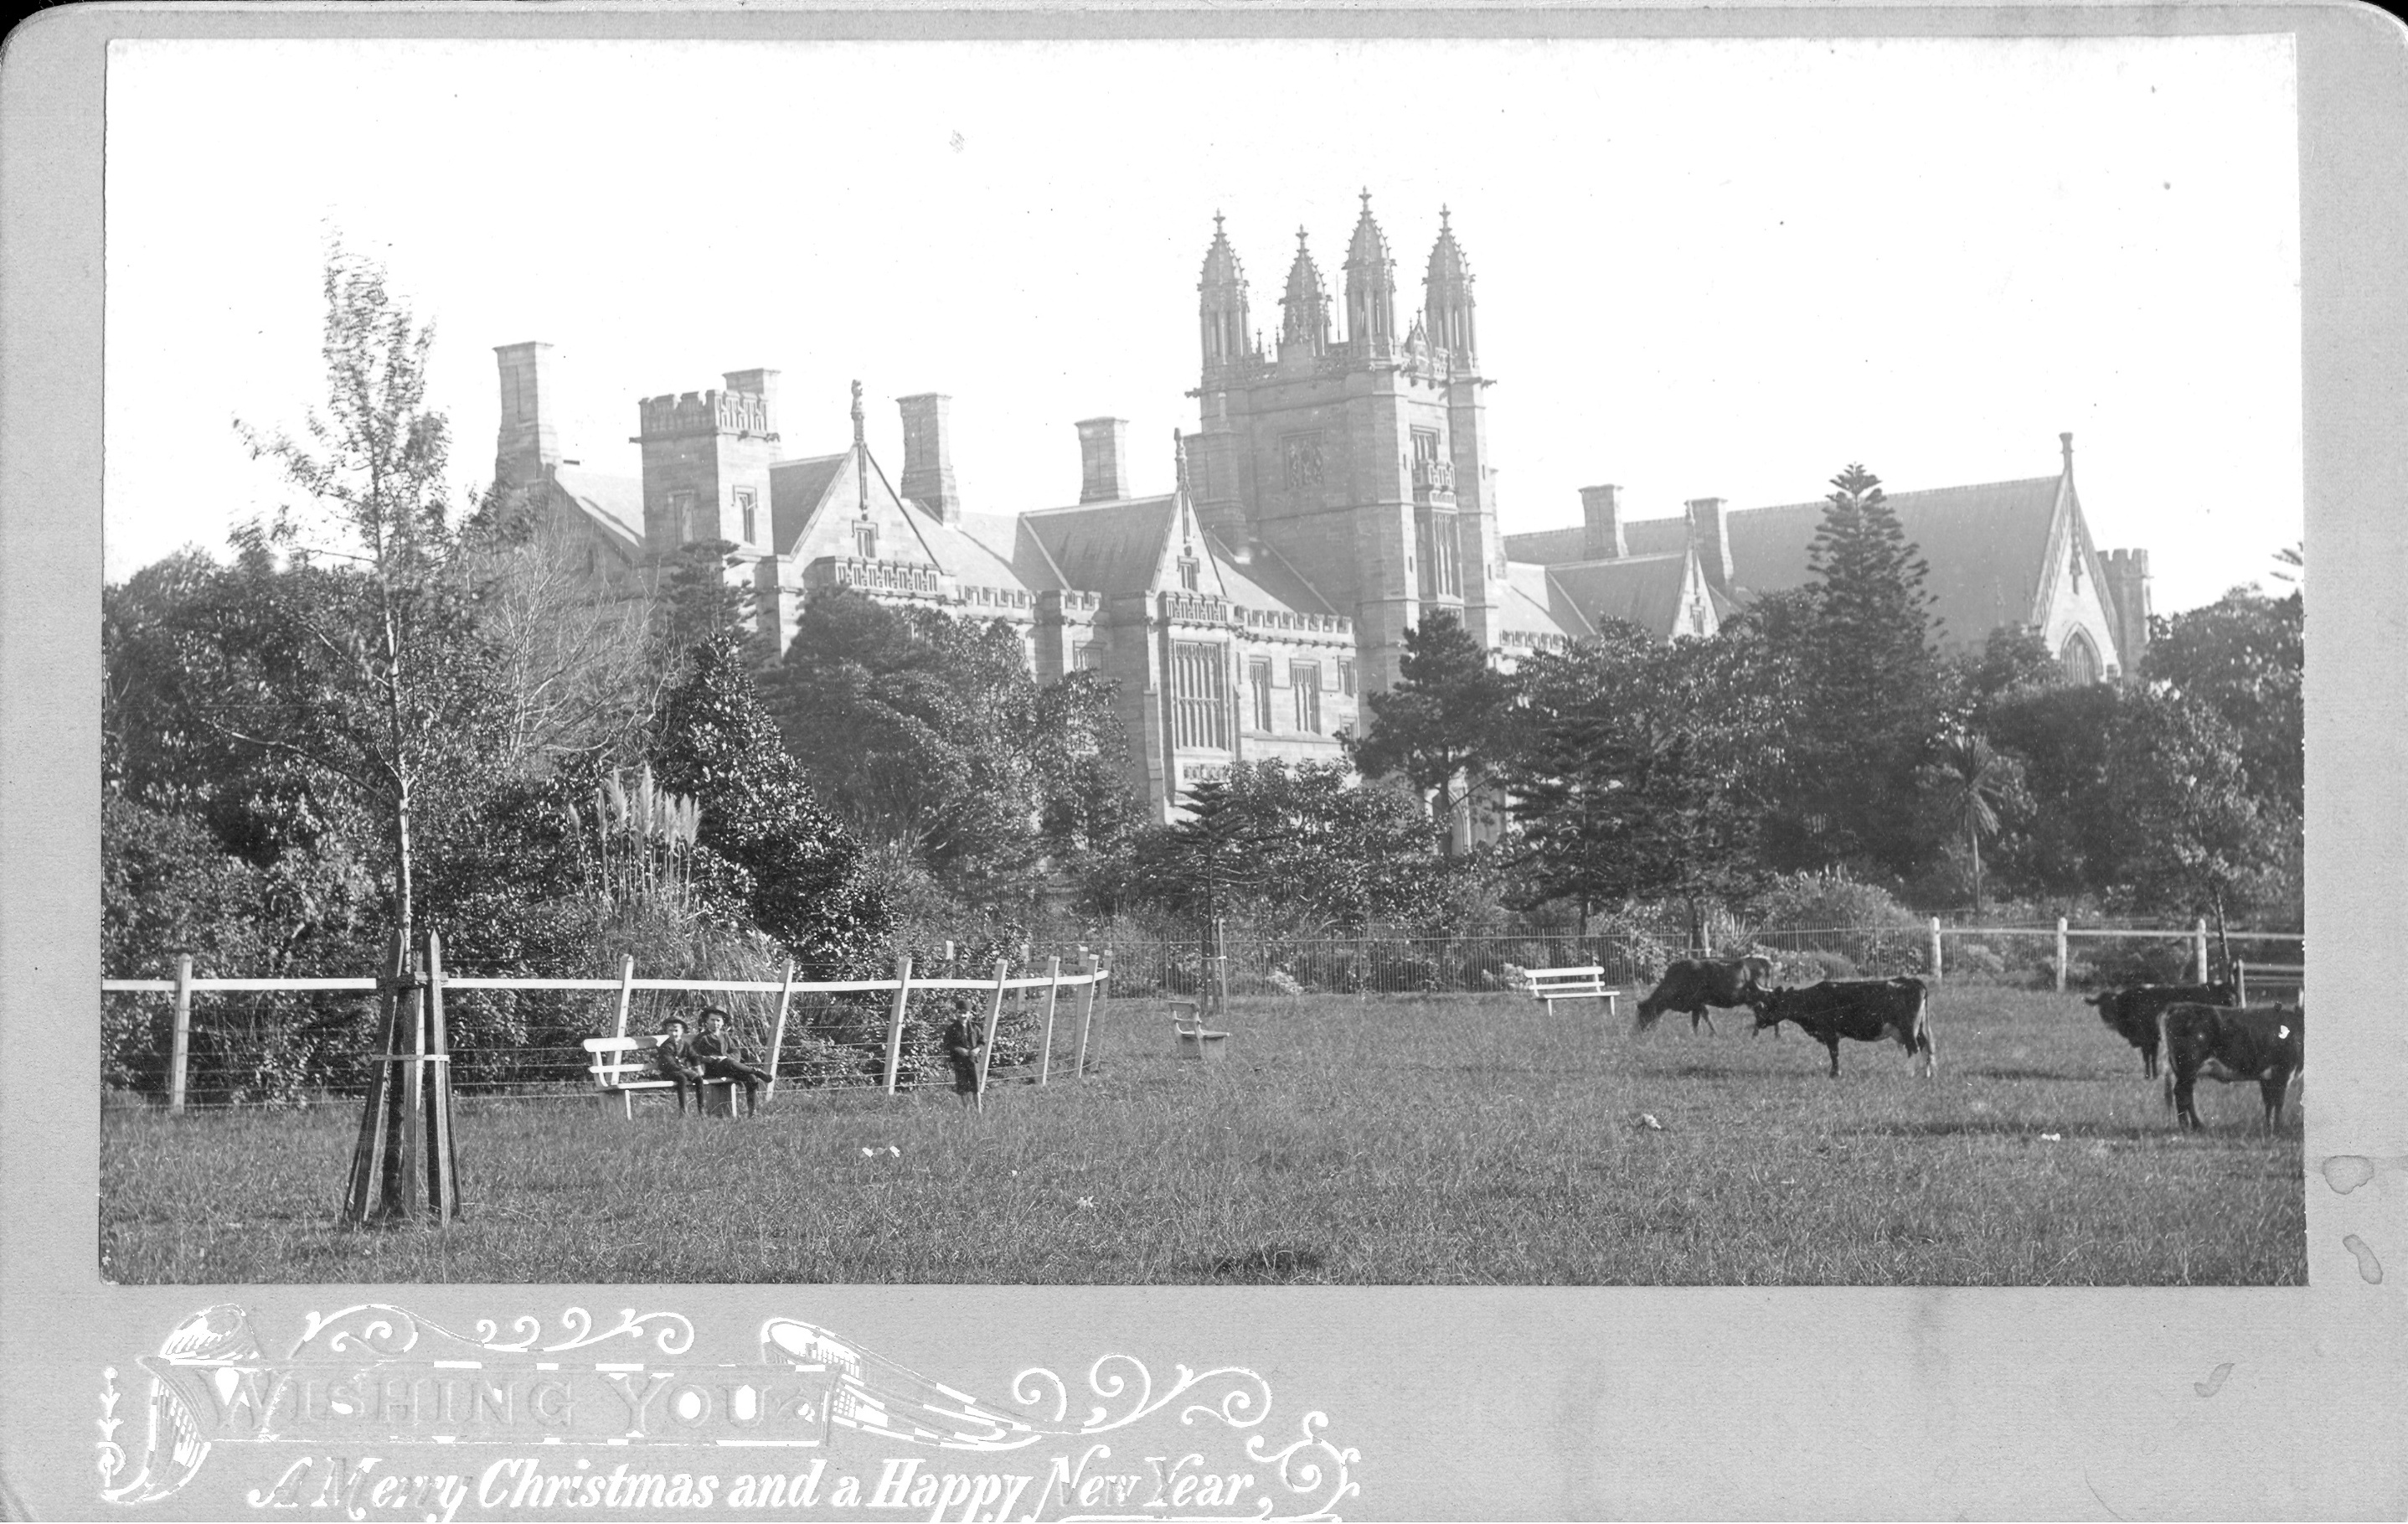 MAIN BUILDING FROM SOUTH EAST, COWS IN FOREGROUND